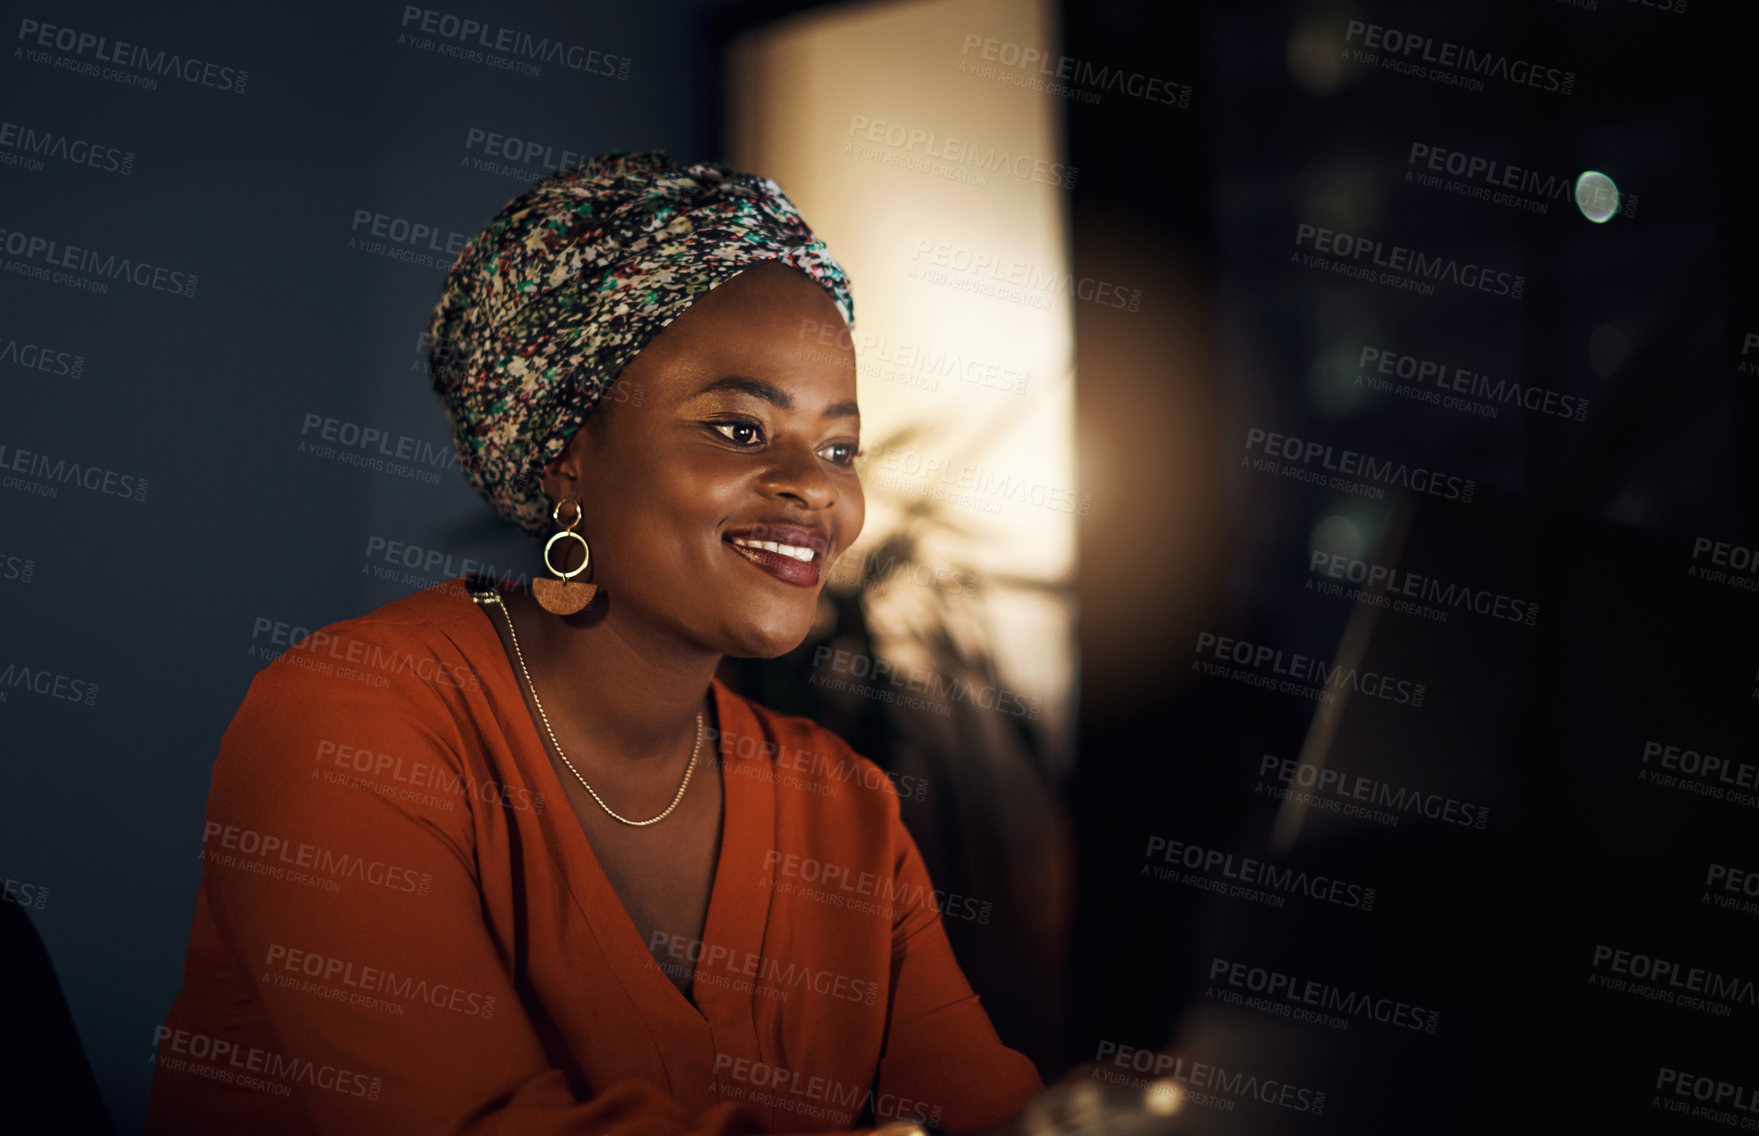 Buy stock photo Shot of a young businesswoman working in an office at night